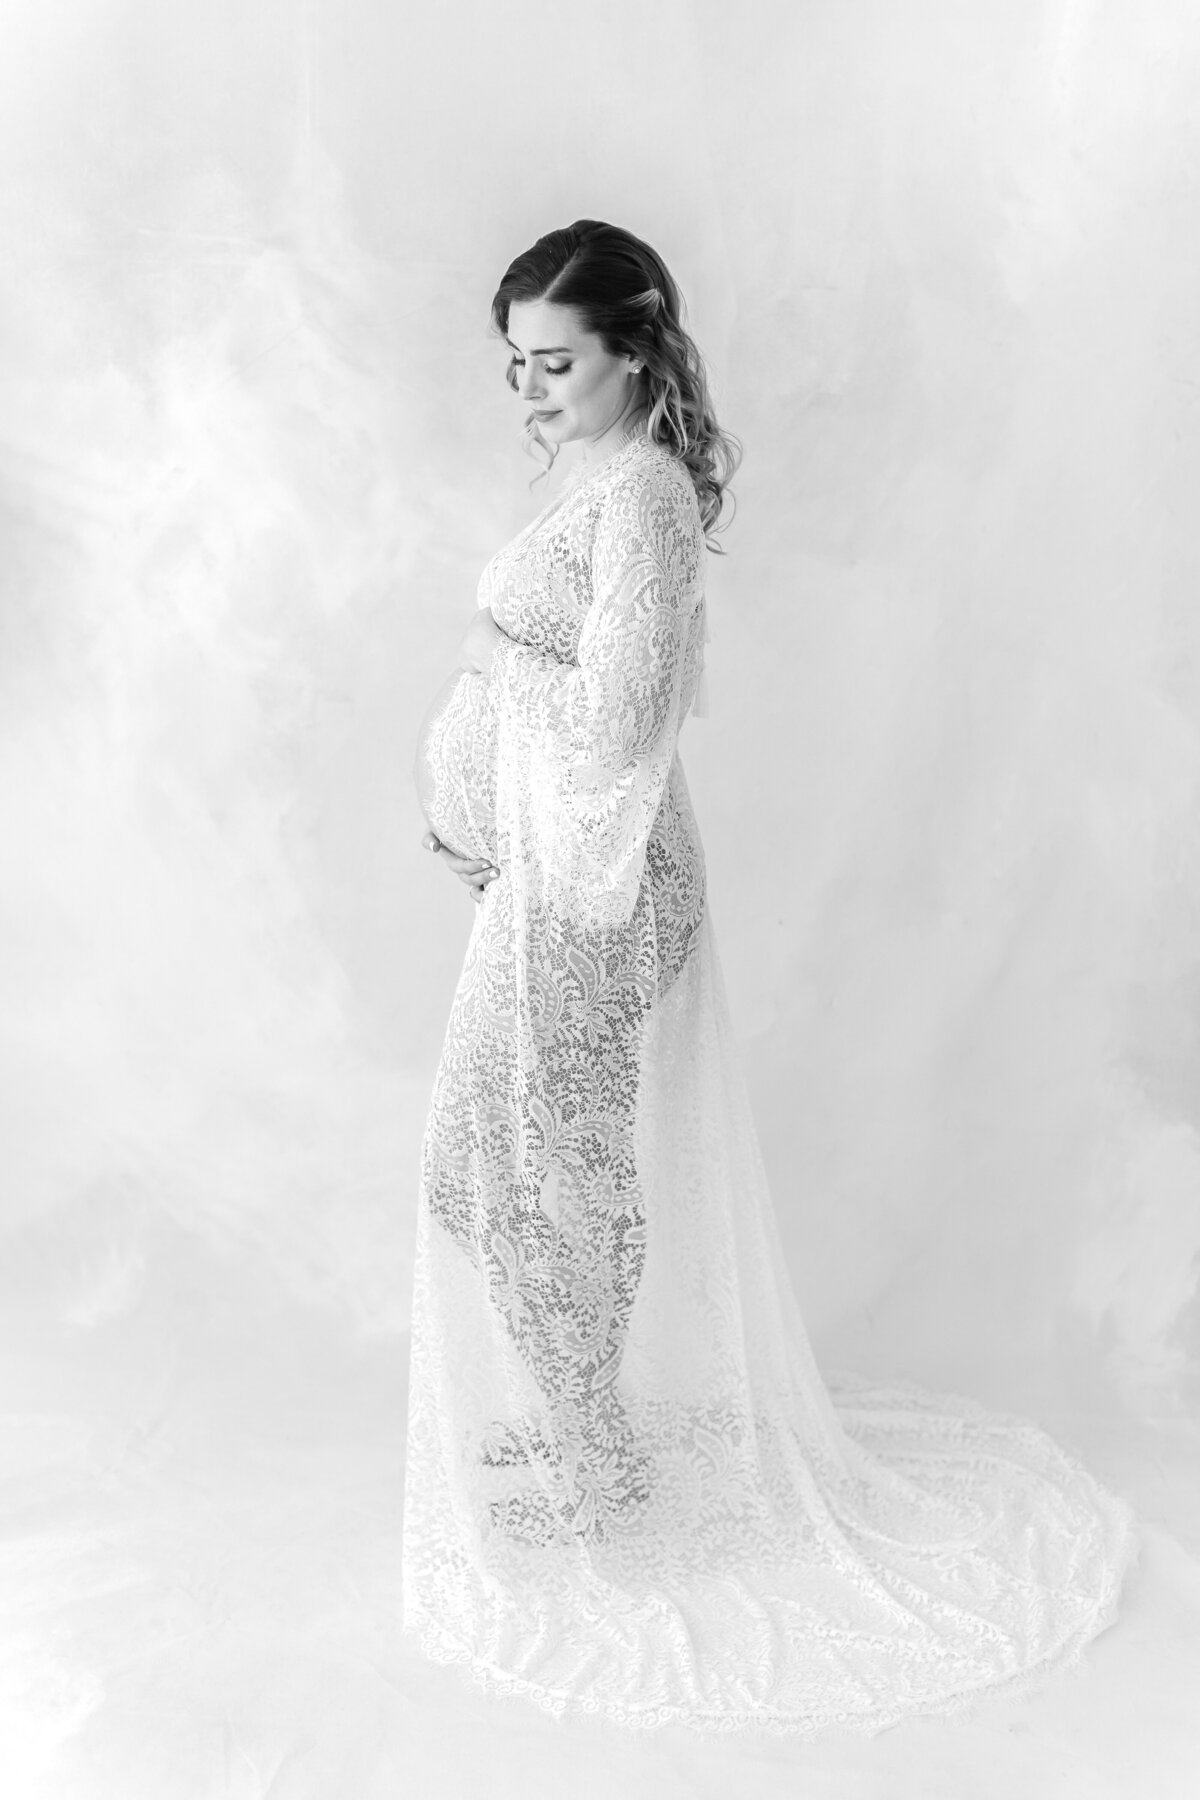 A Northern Virginia Maternity Photographer black and white photo of a pregnant mama in a lace boudoir gown